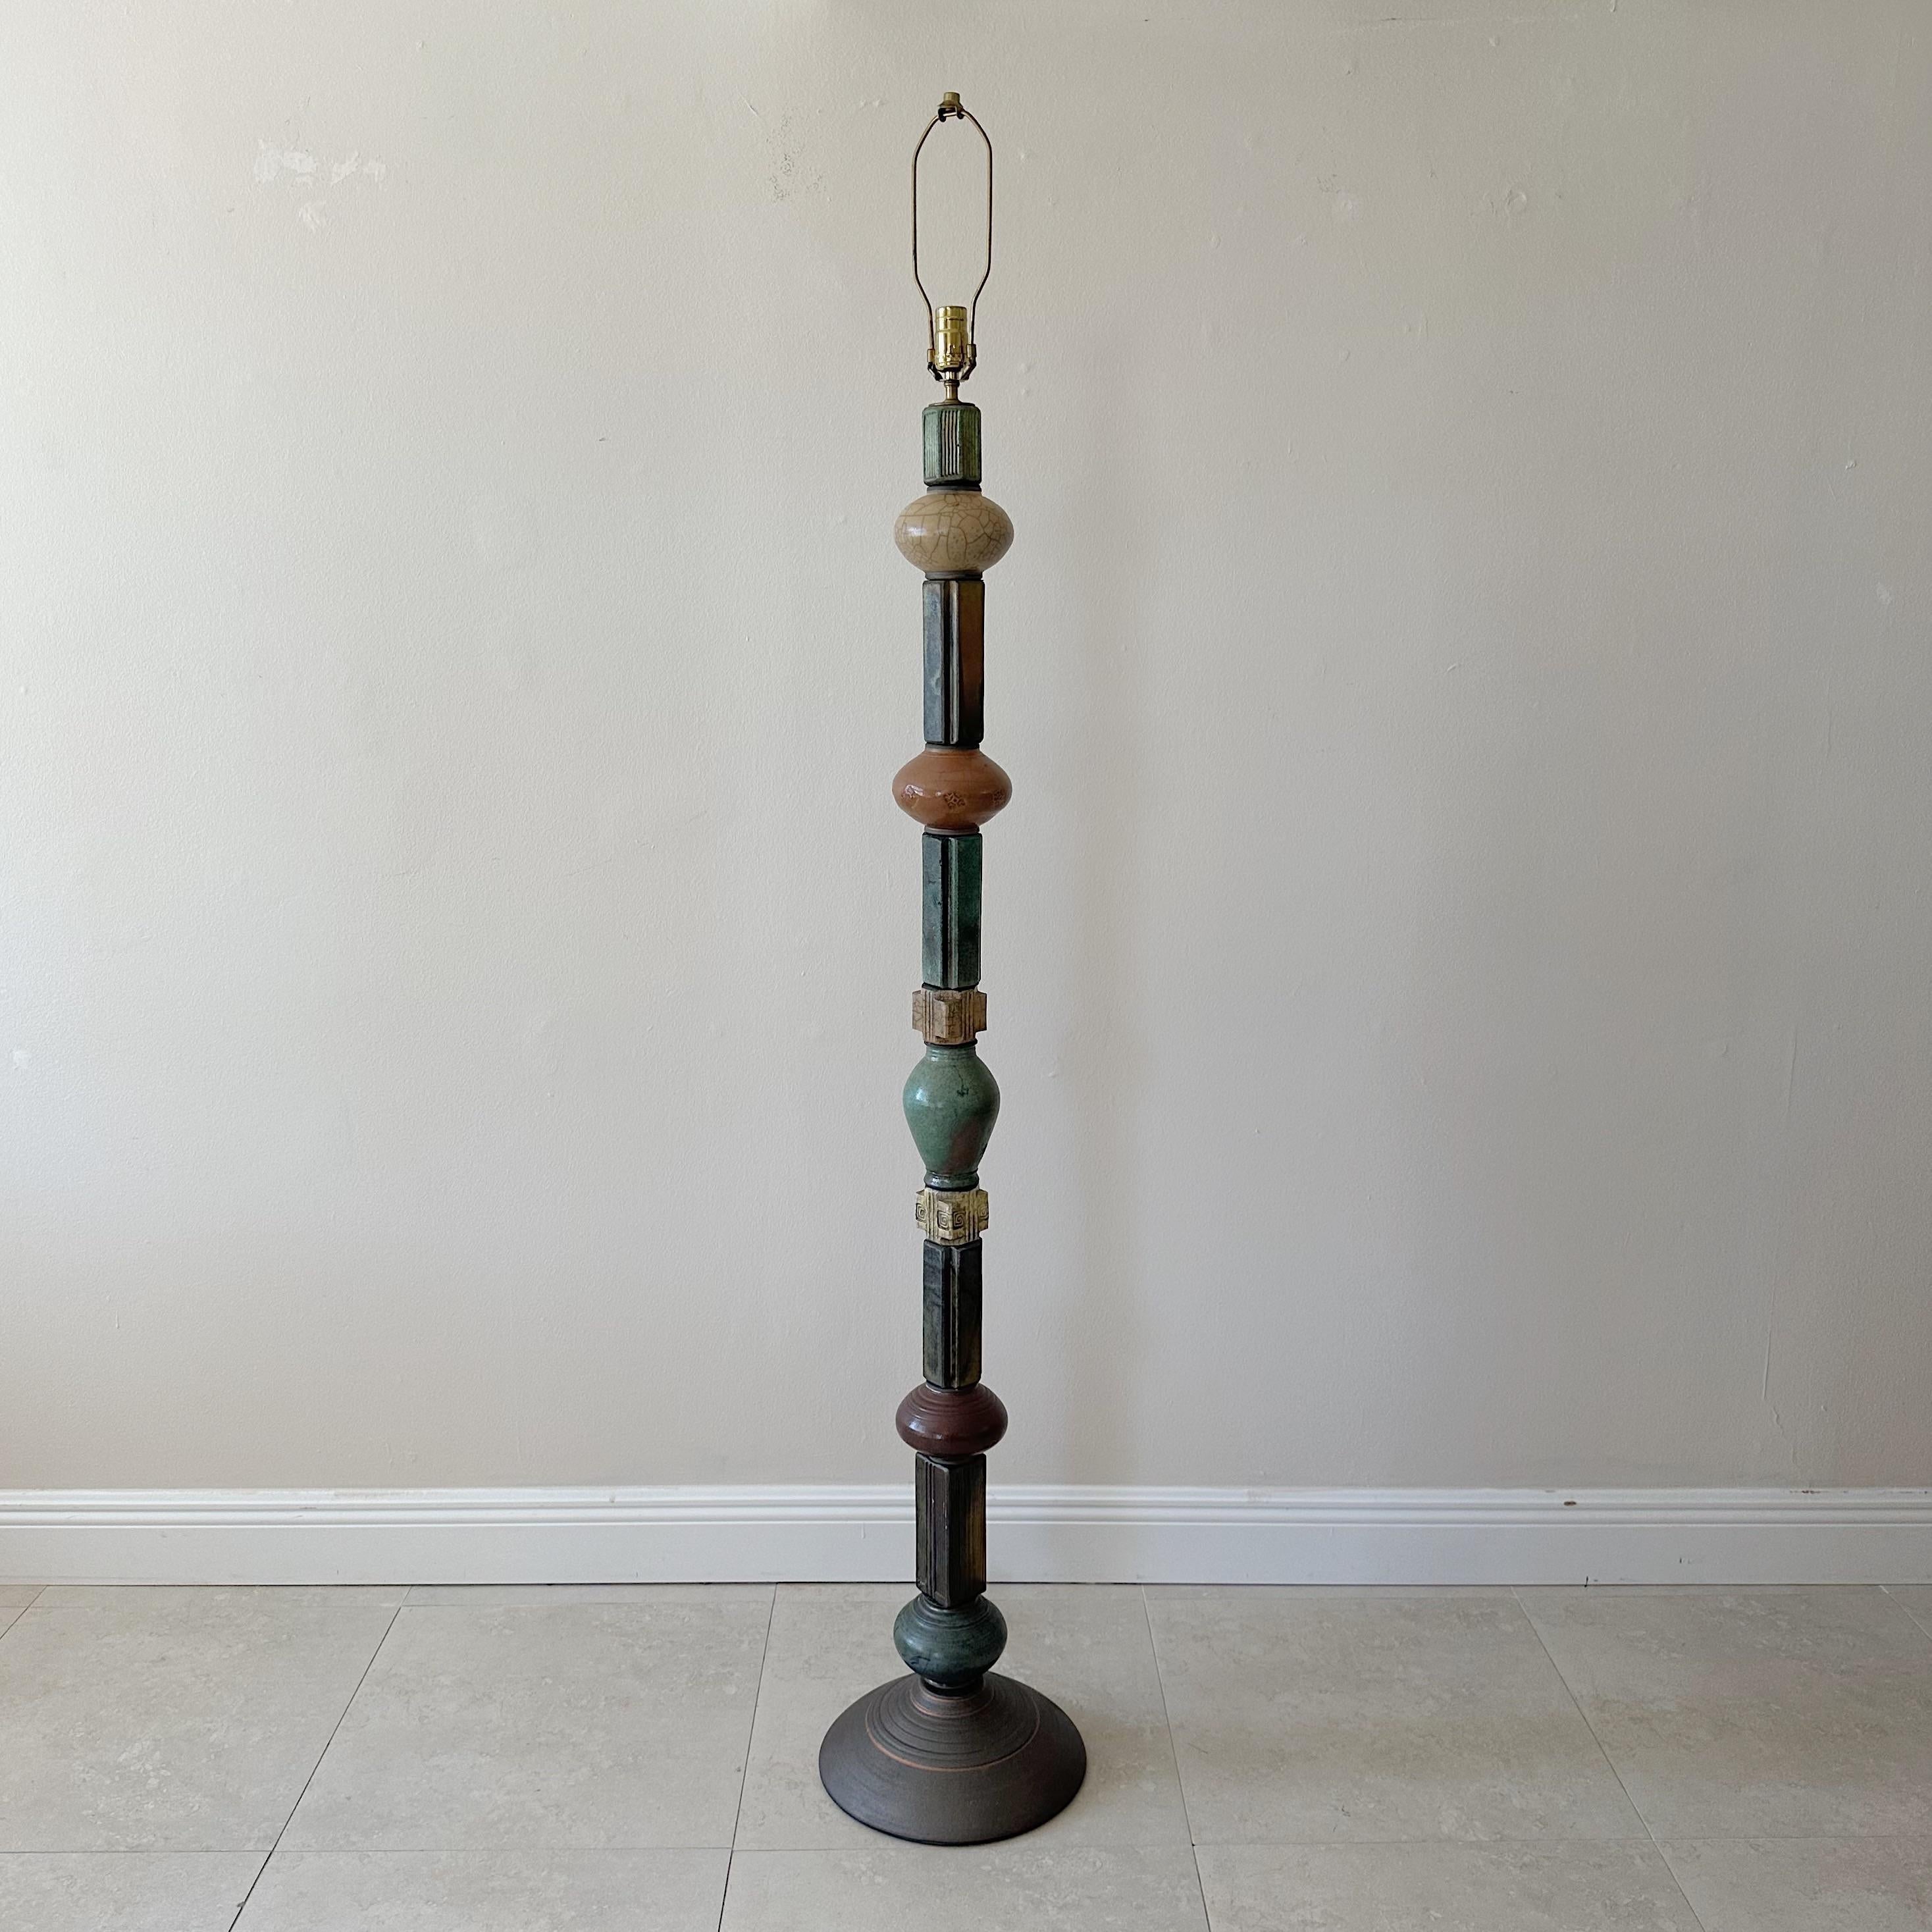 This is a one-of-a-kind floor lamp made up of 13 distinct pottery pieces arranged on a single stem. Each piece features its own intricate decoration and color scheme, giving the lamp a striking and personalized appearance. The lamp is signed on the